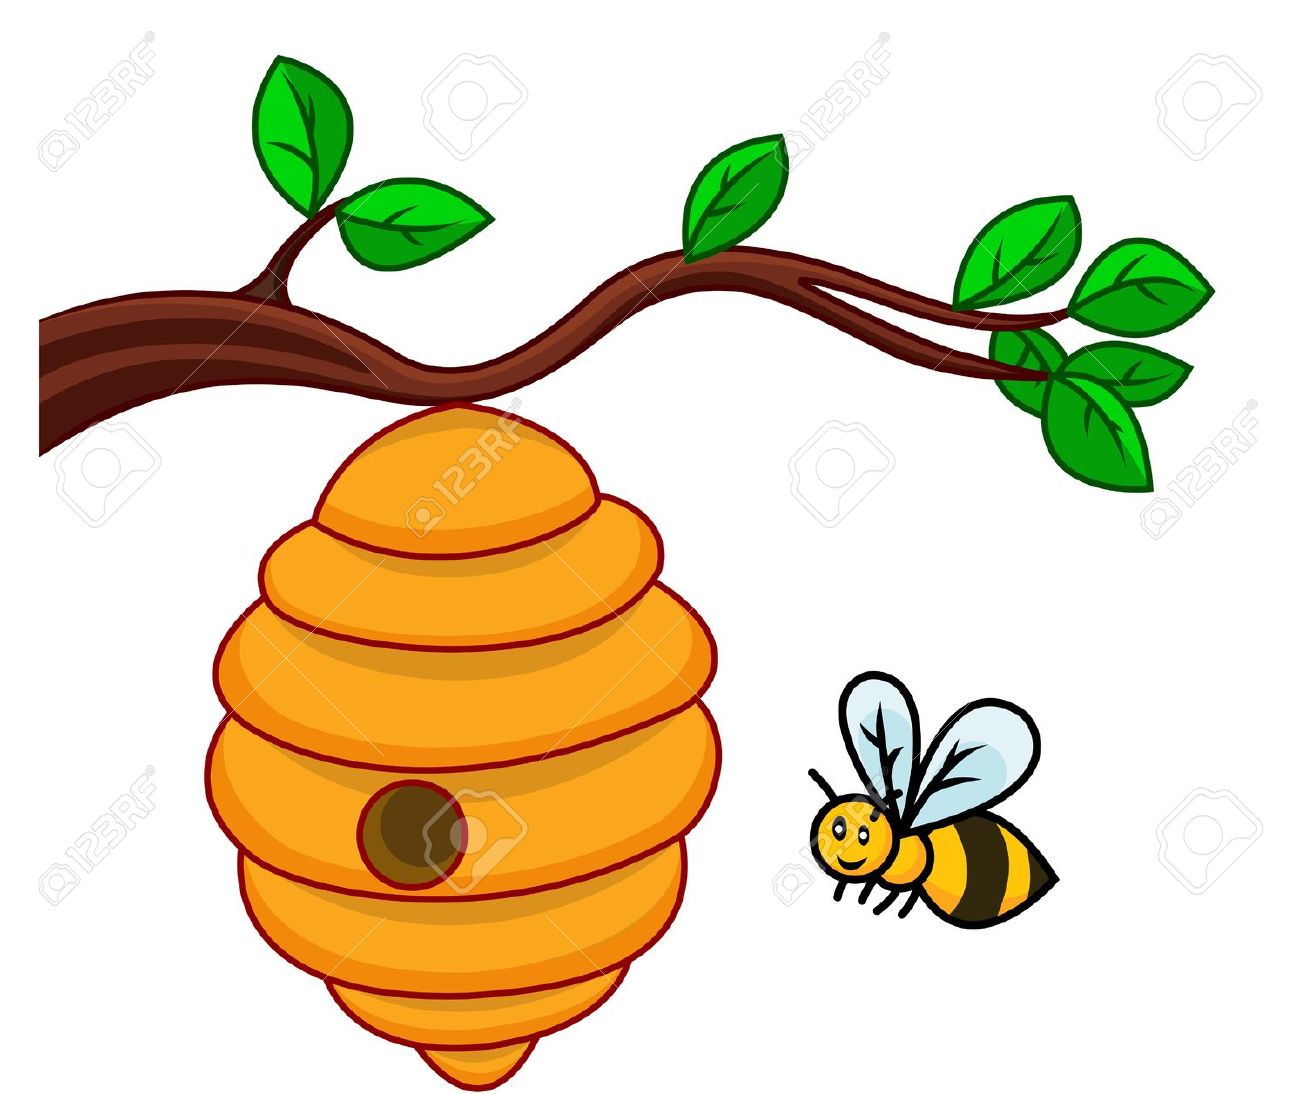 beehive clipart. beehive: illustration of .